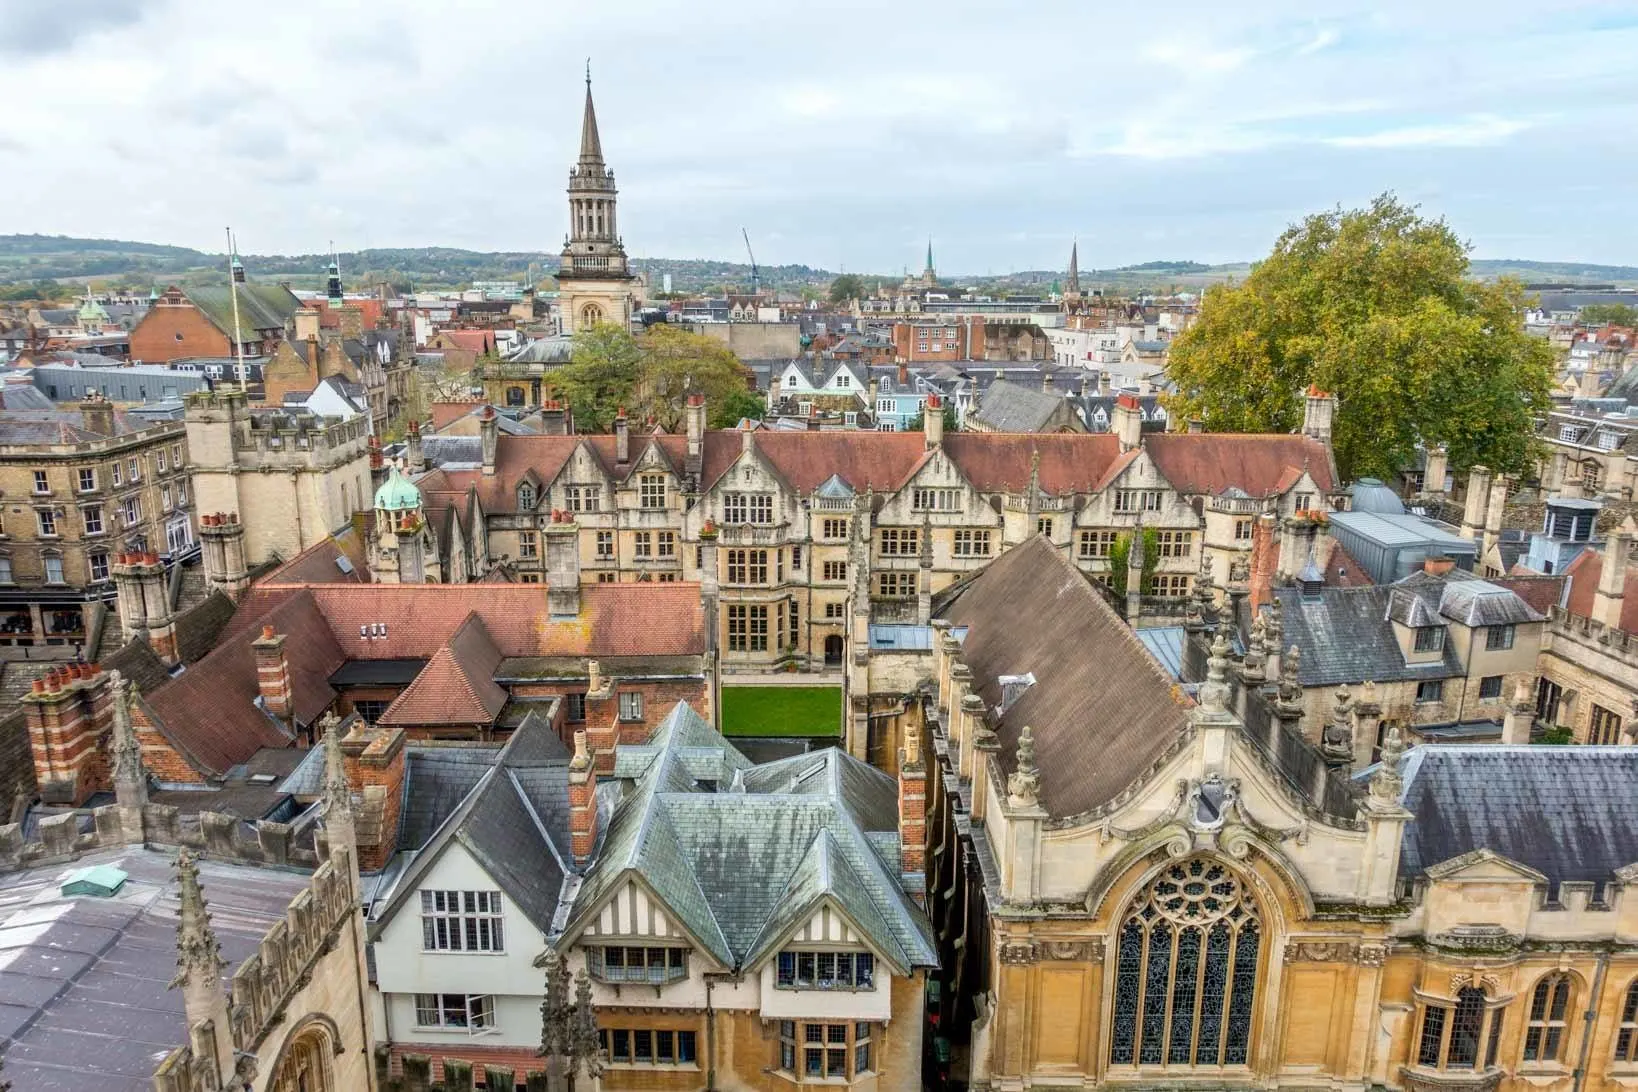 Rooftops and spires of Oxford England